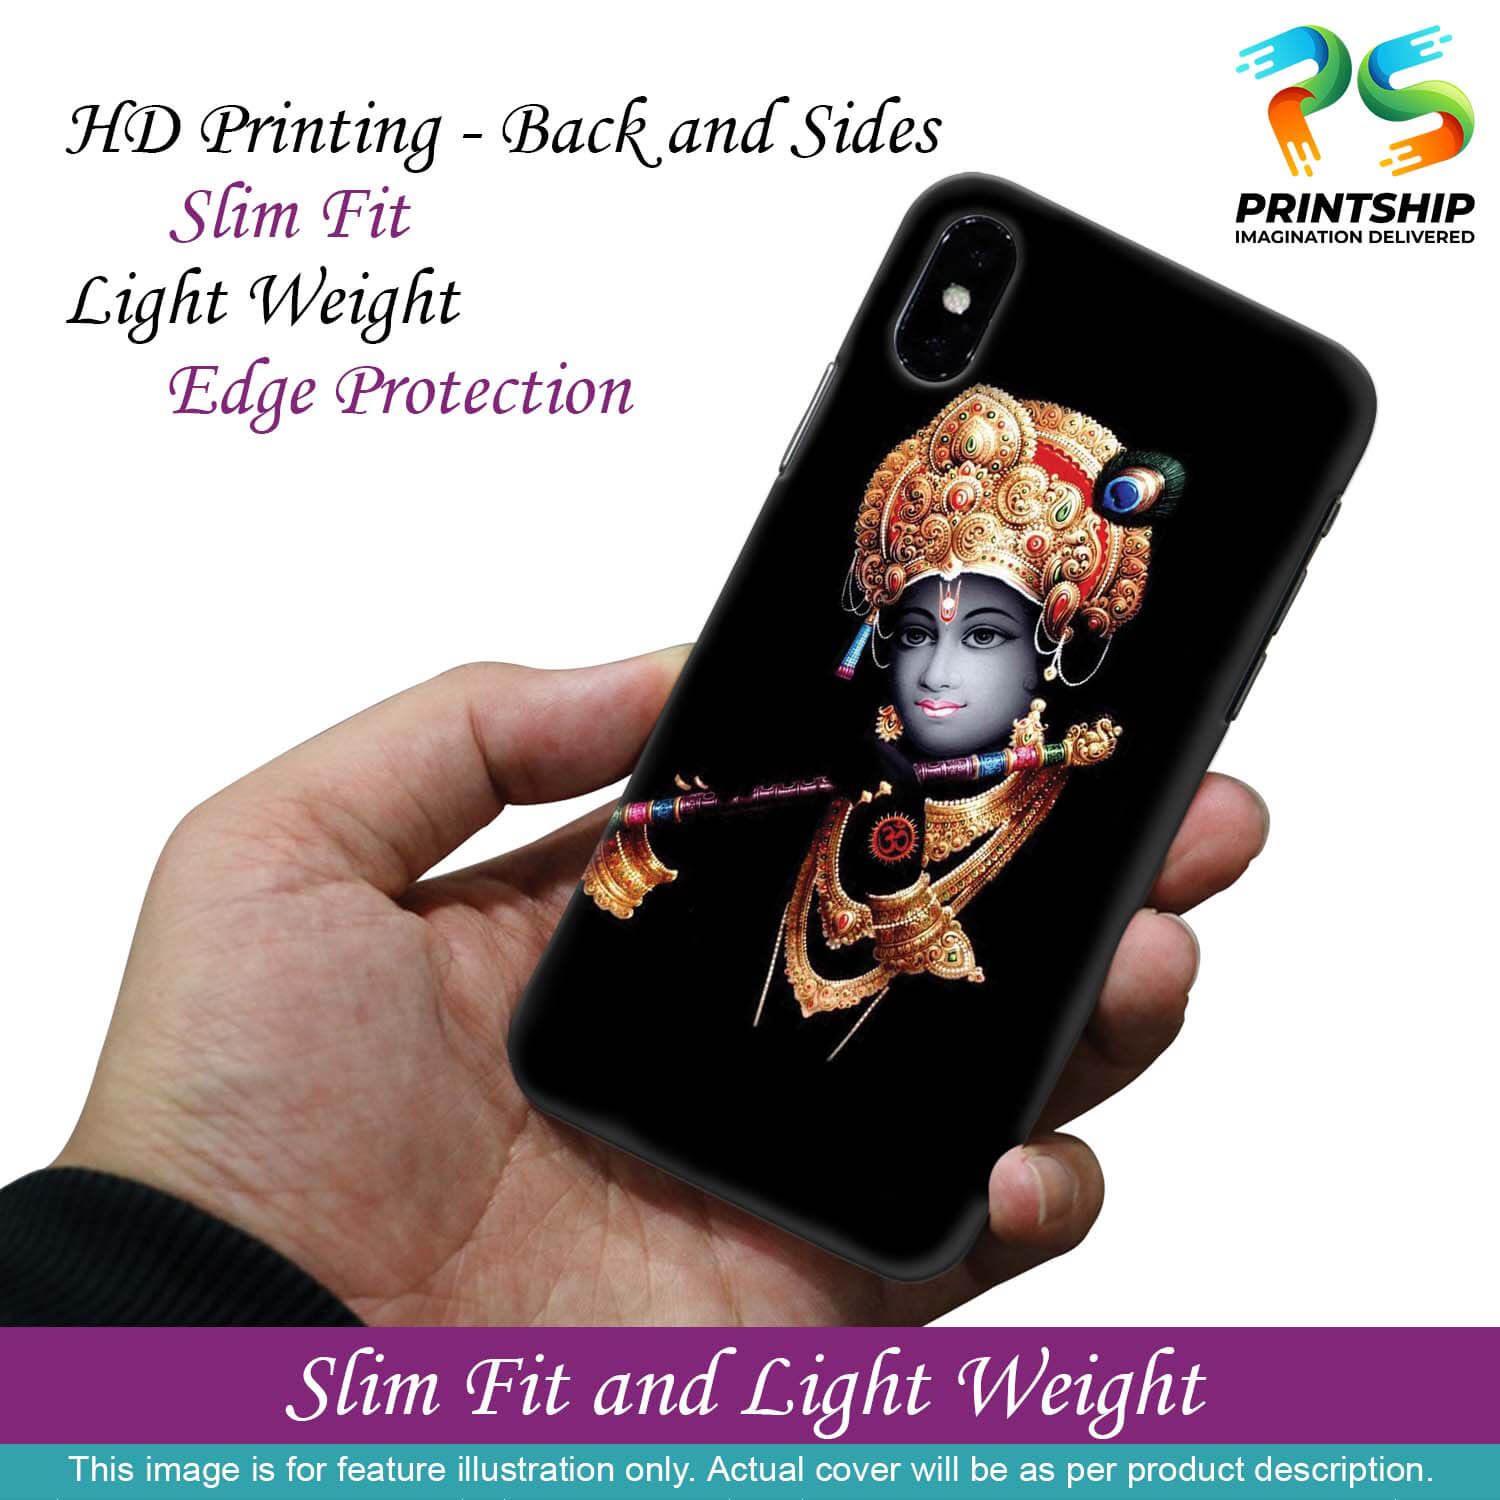 G0186-Lord Krishna Back Cover for Samsung Galaxy M11